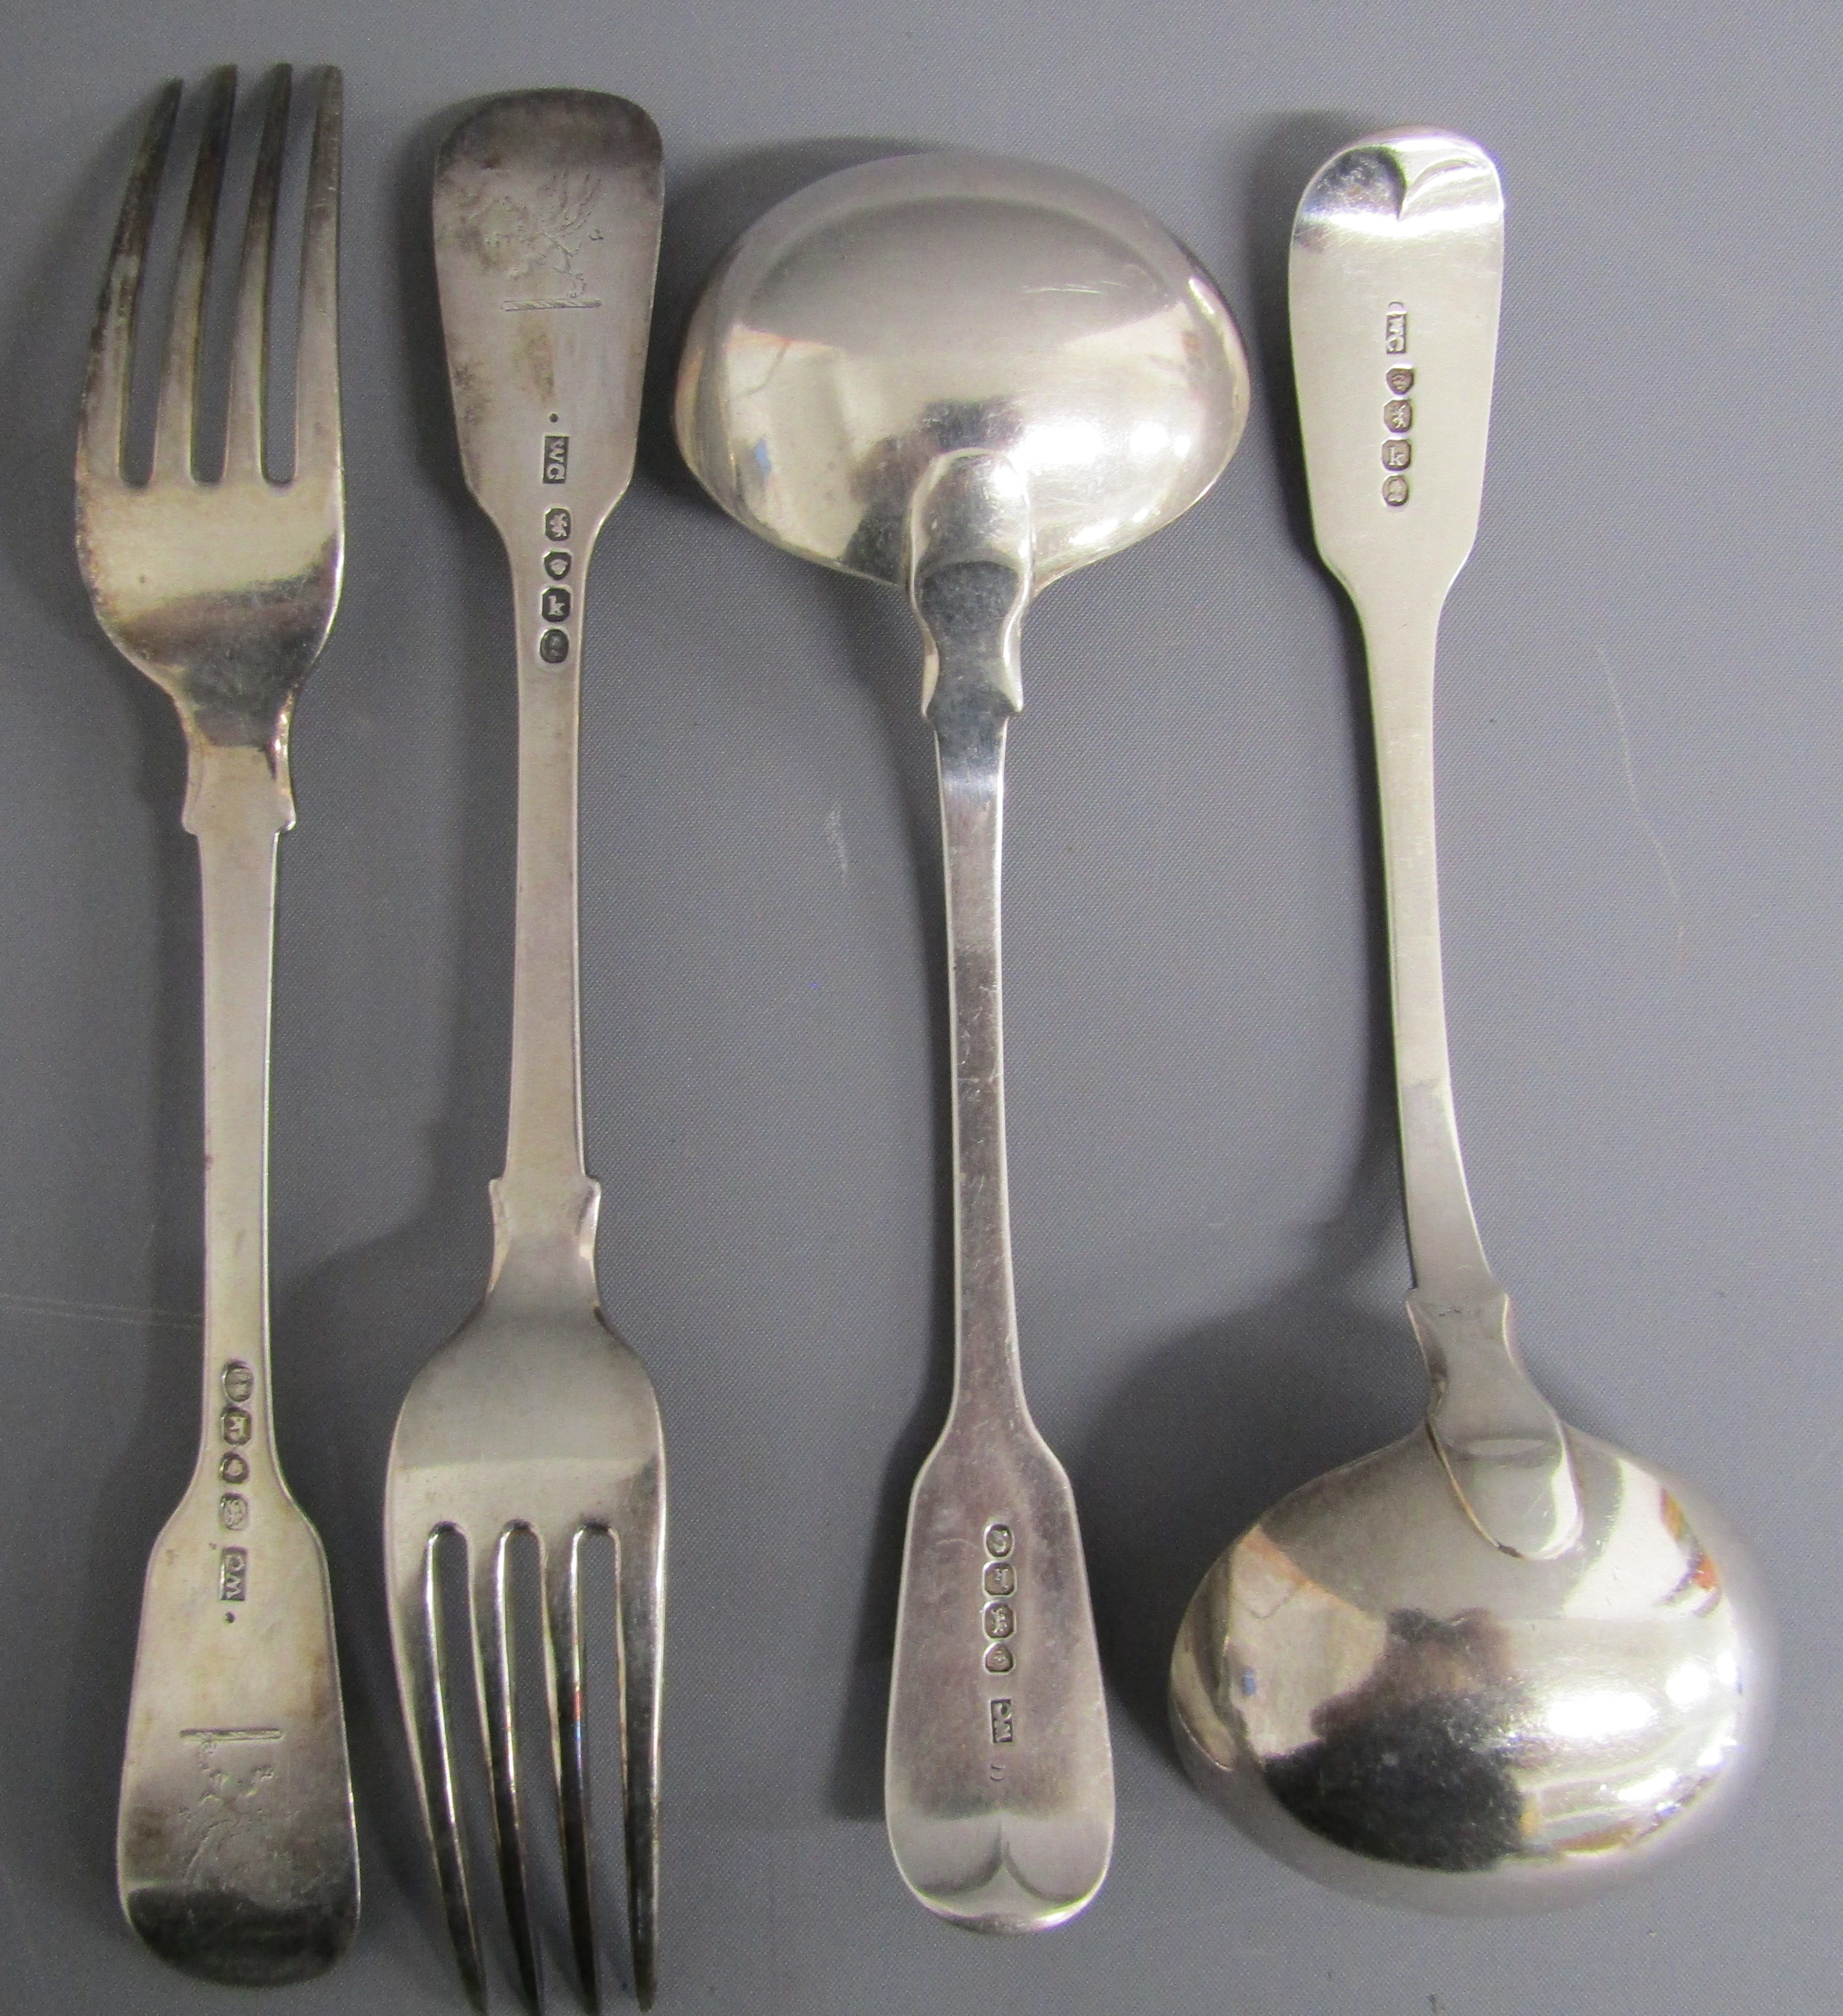 2 silver forks and 2 ladles, William Cripps London 1825 -  - total weight 8.8 ozt - Image 2 of 5